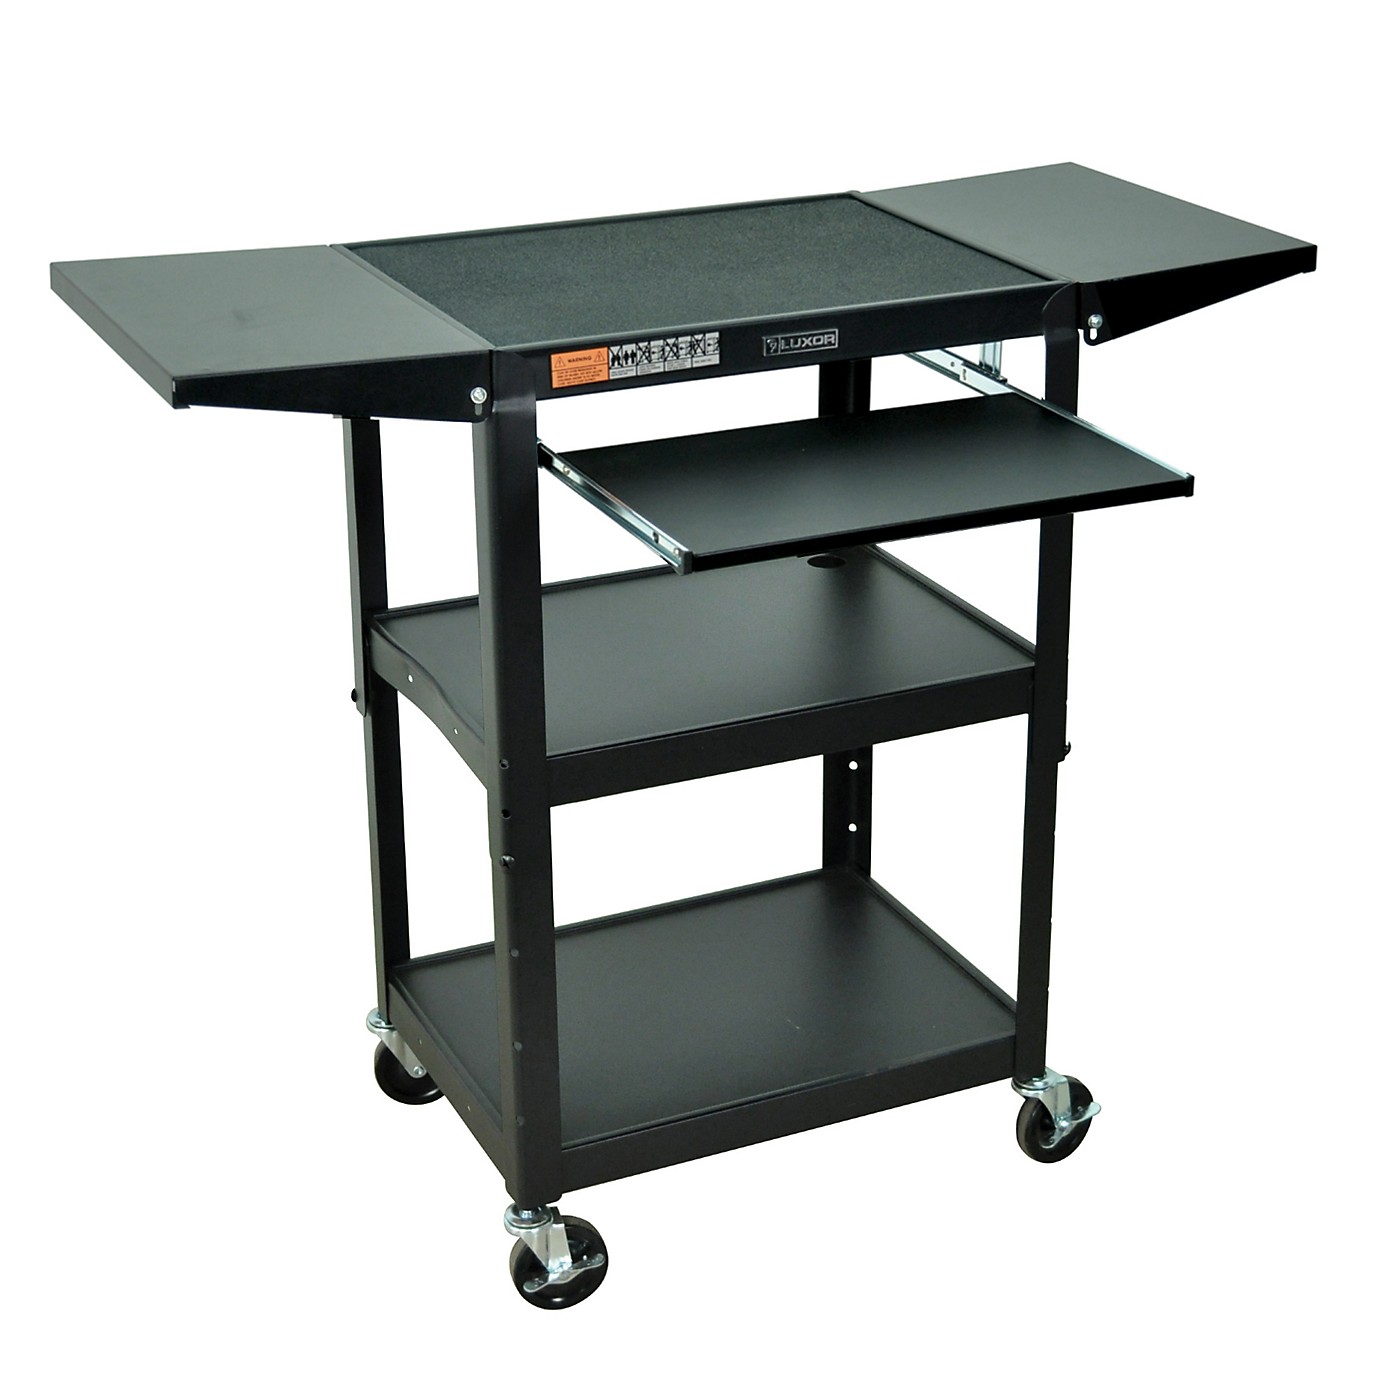 H. Wilson Adjustable Height Cart with Keyboard Tray and Drop Leaf Shelves thumbnail